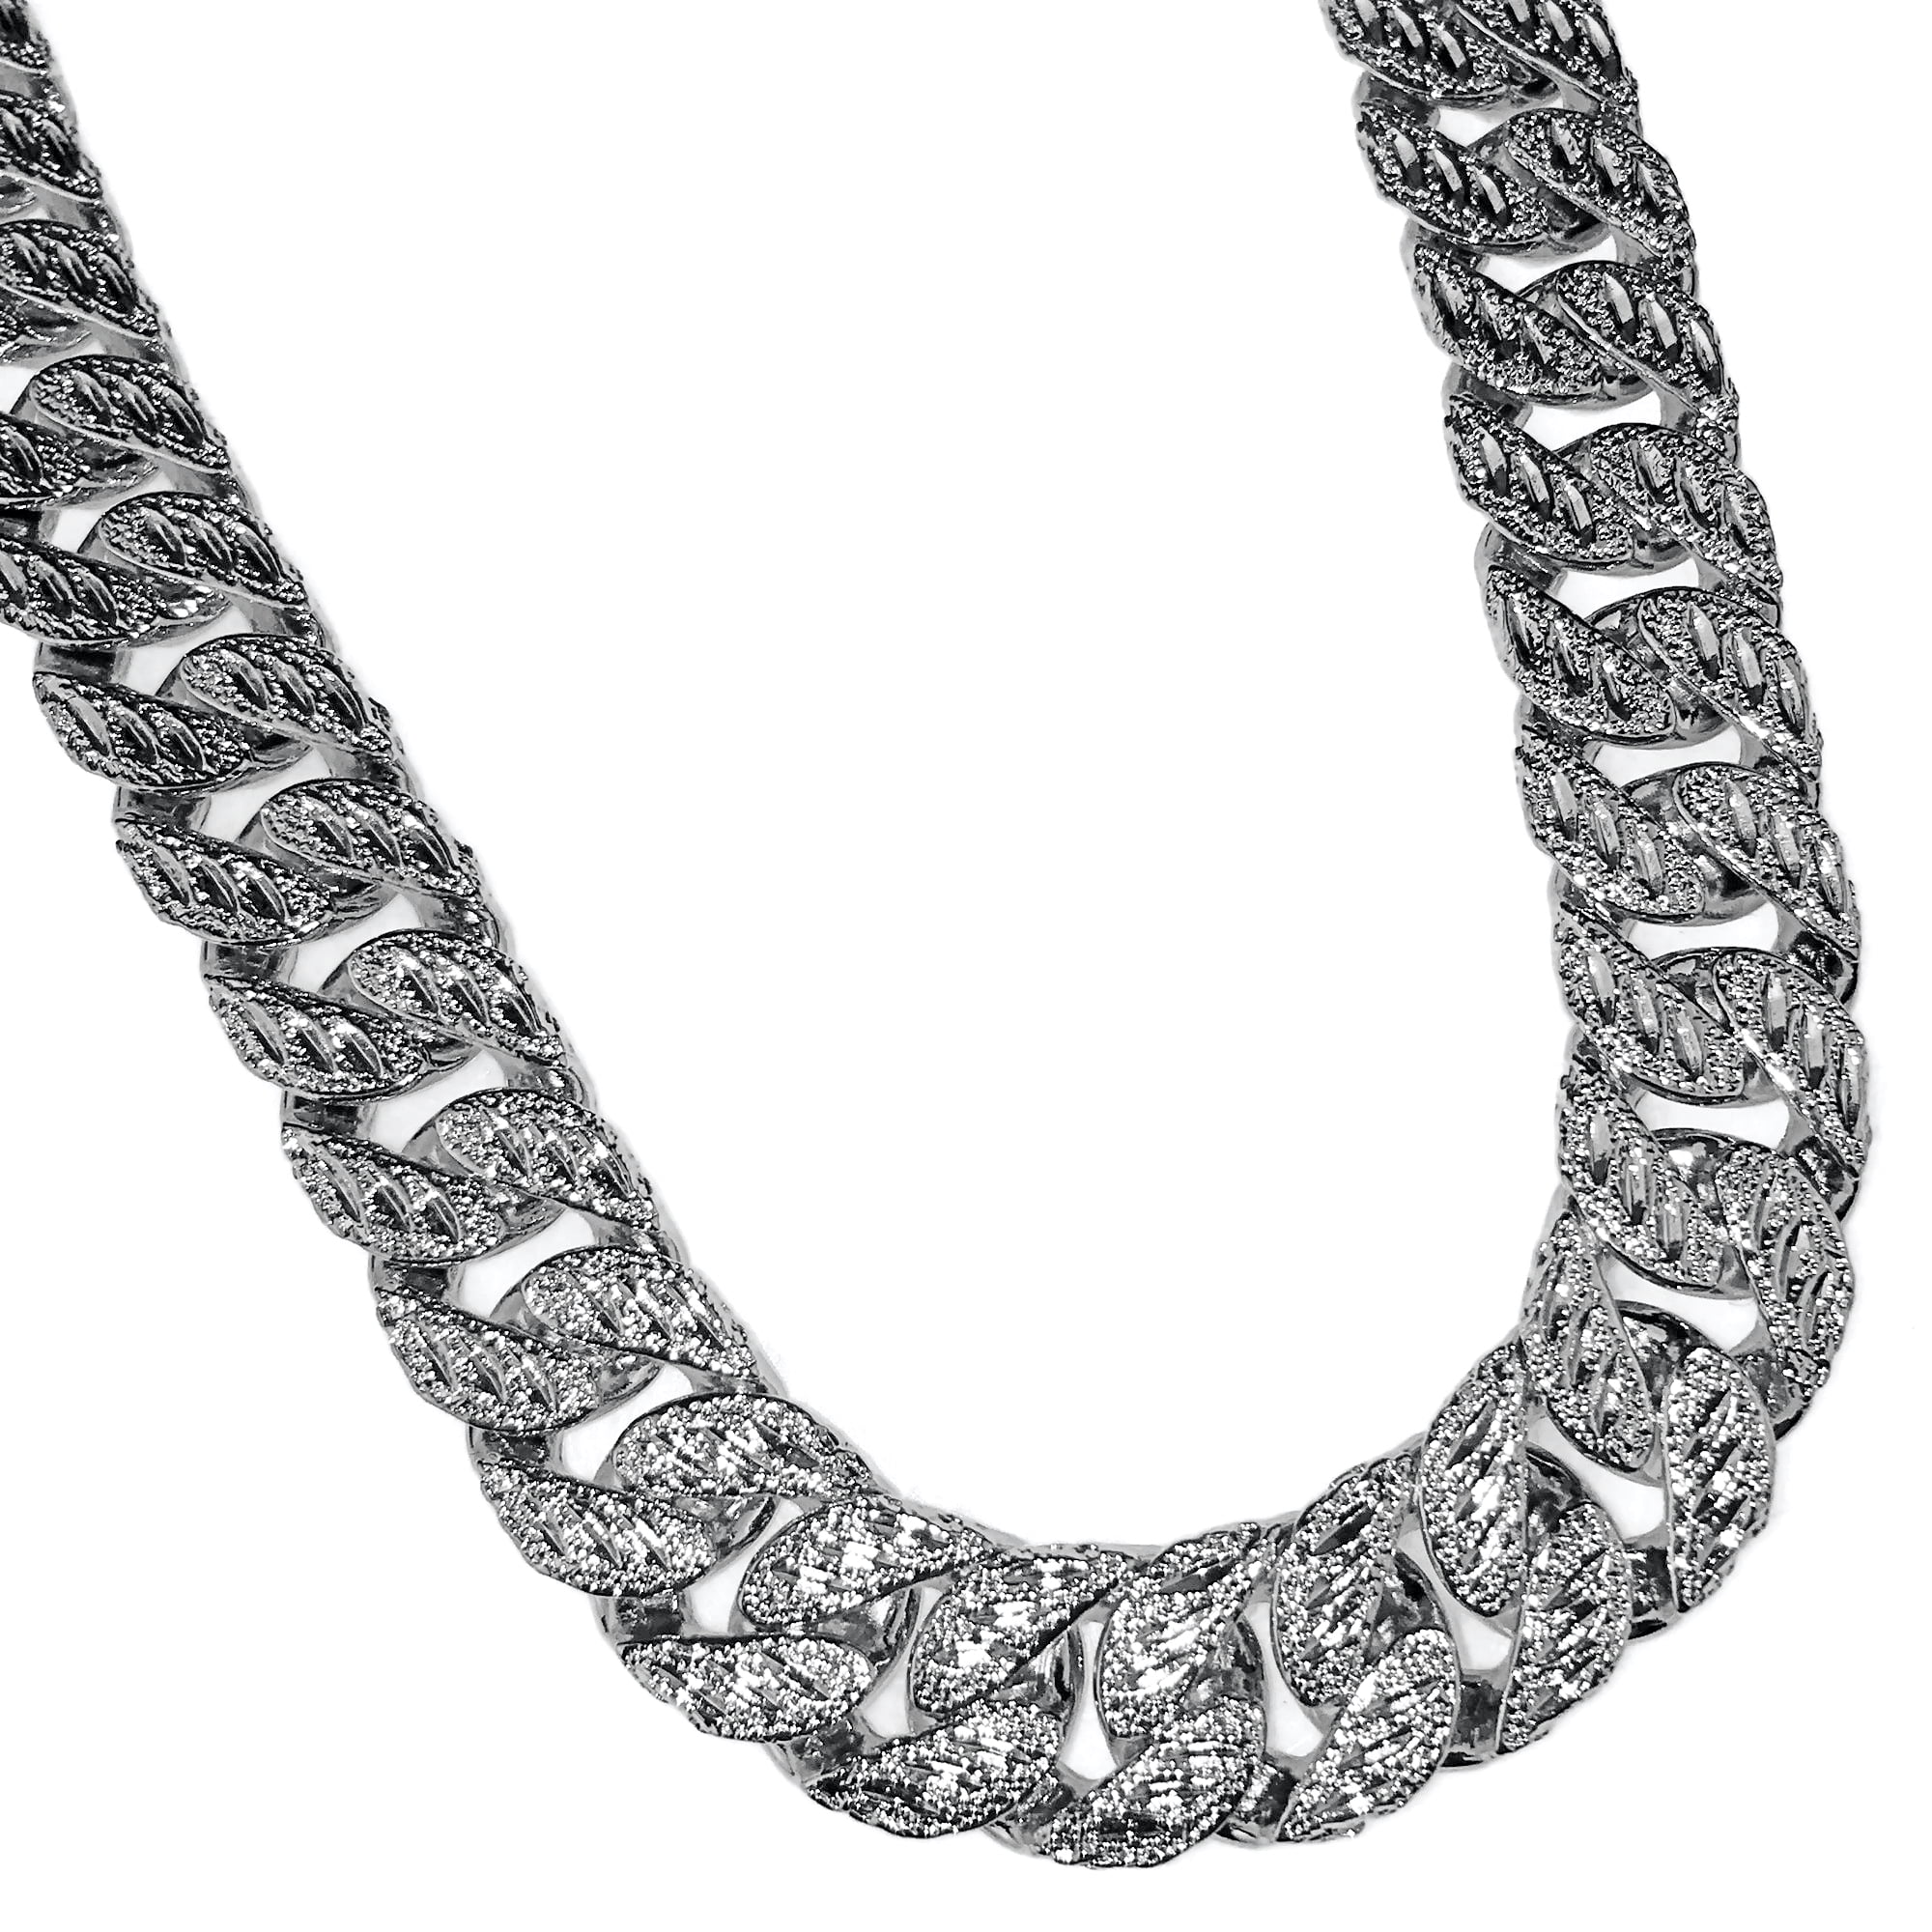 HH Bling Empire Iced Out Diamond Cuban Link Chain for Men and Women,Silver  or Gold Miami Cuban Necklaces Hip Hop,Chunky Chains 16-30 Inches (Red-24)  